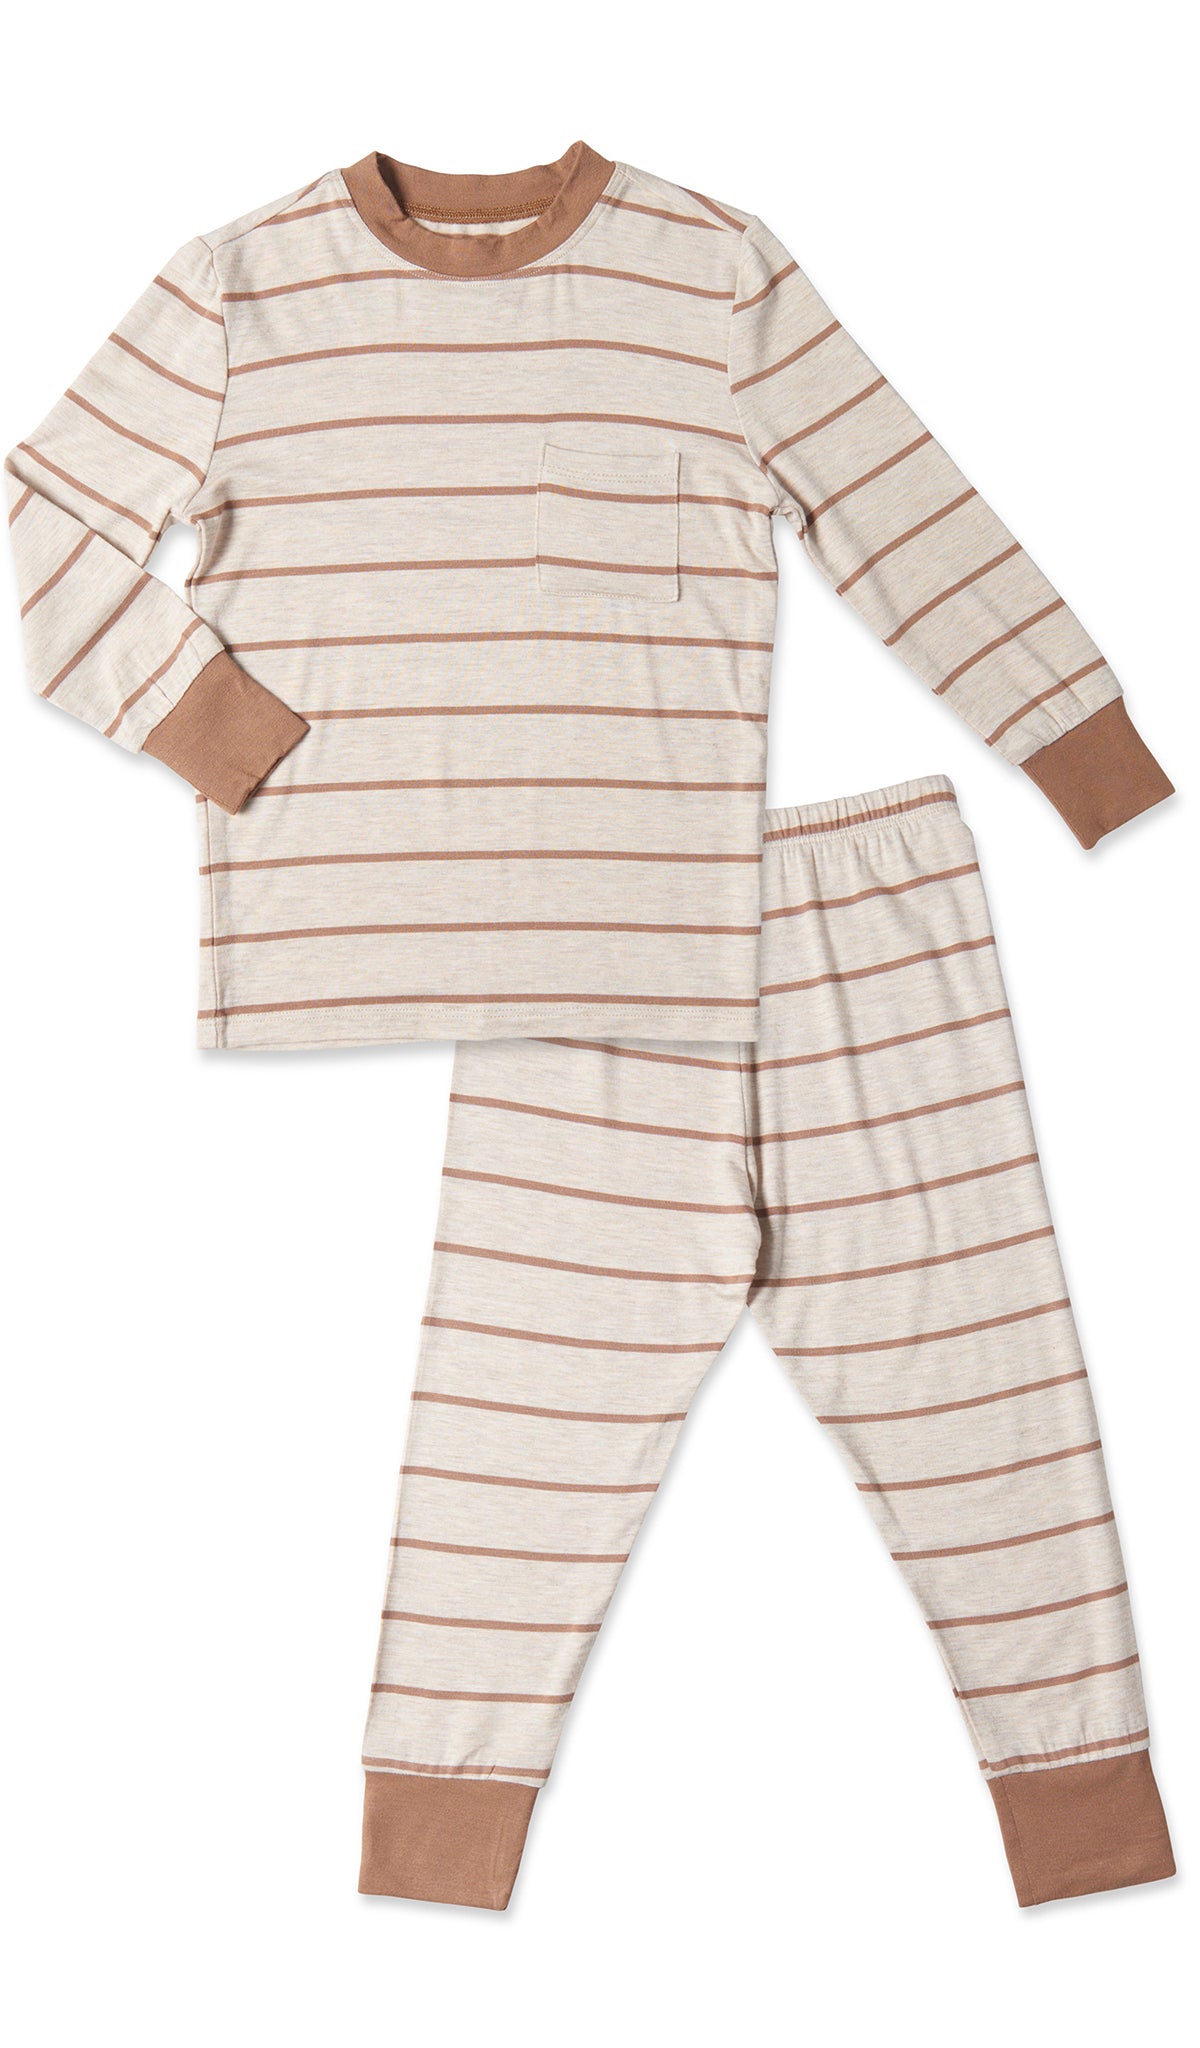 Mocha Stripe Emerson Kids 2-Piece Pant PJ. Long sleeve top with cuff trim and long pant with cuff trim.